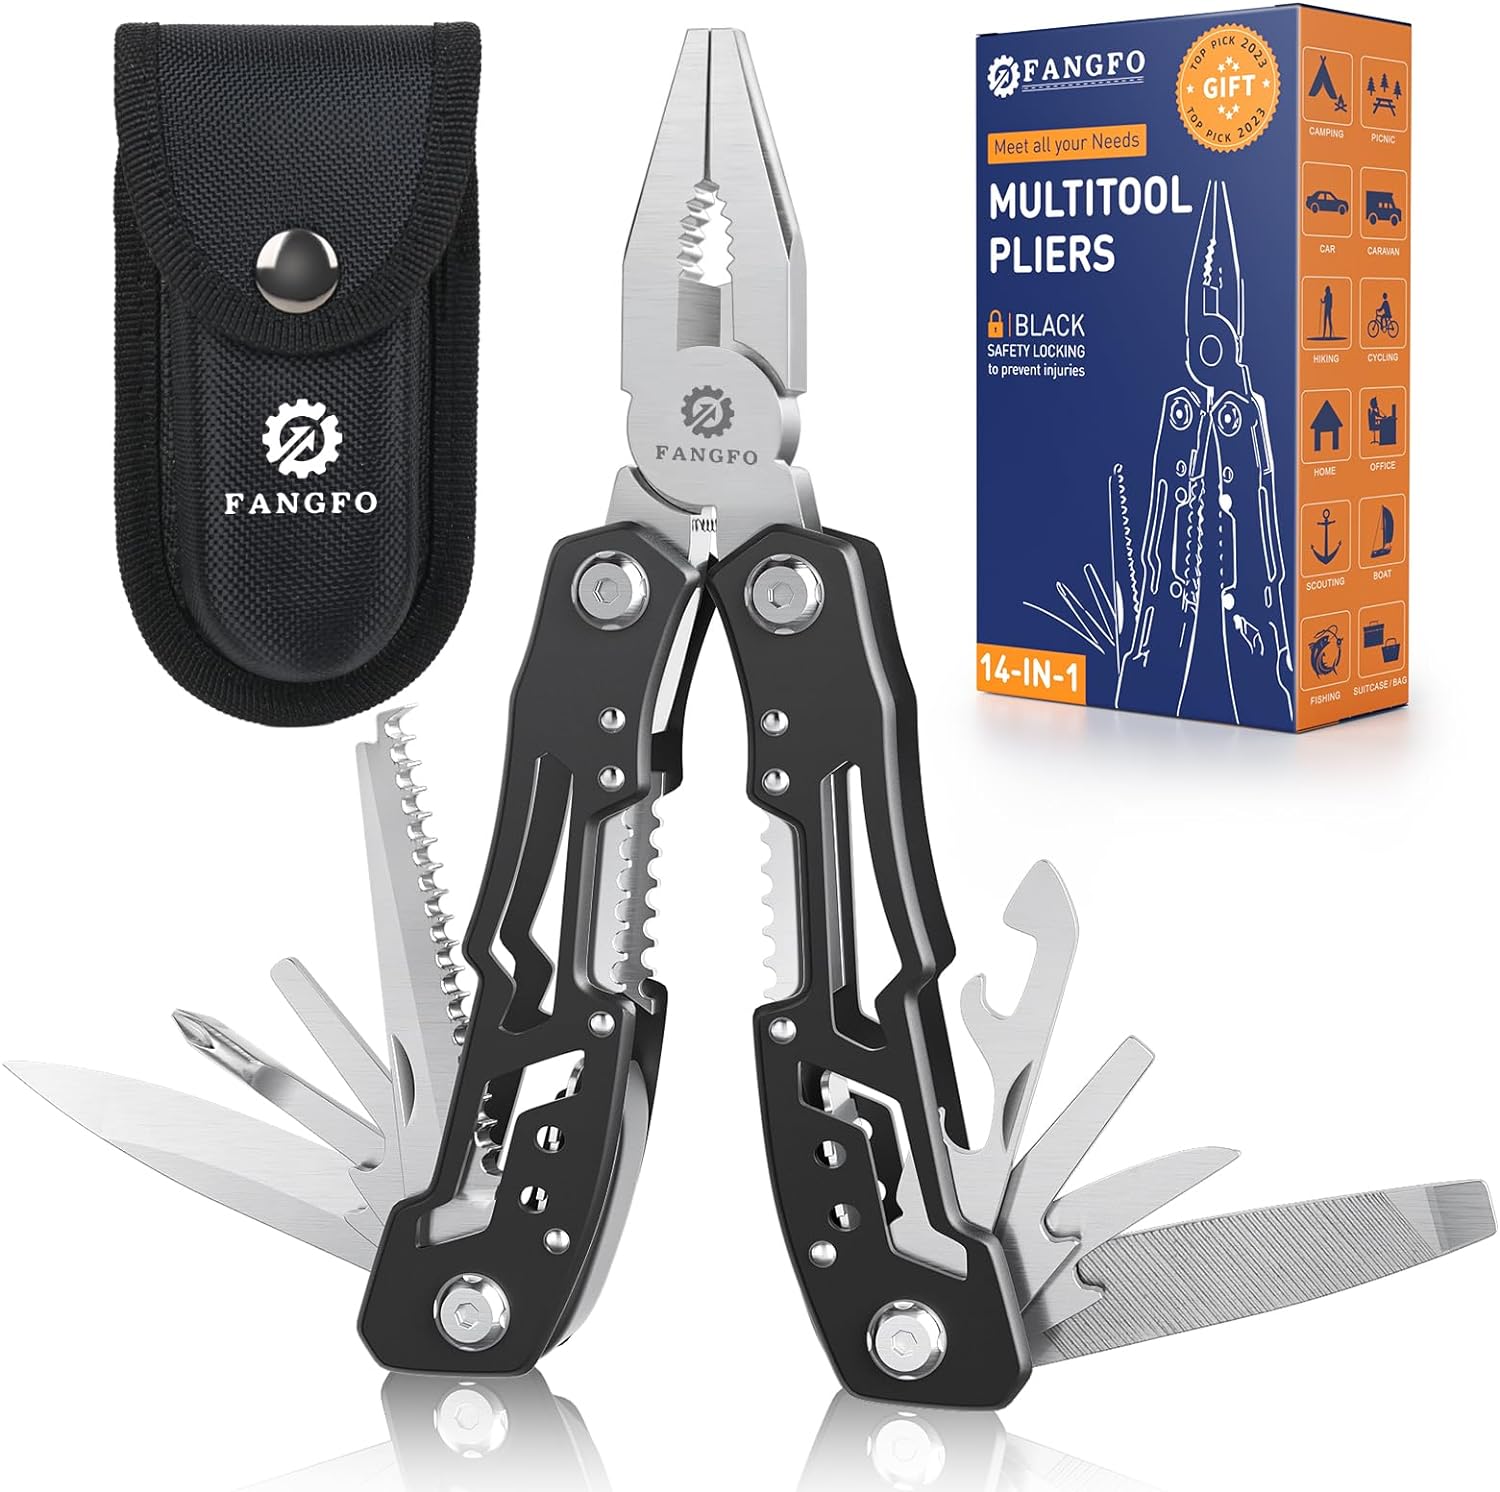 14-In-1 Multitool with Safety Locking, Professional Stainless Steel Multitool Pliers Pocket Knife, Bottle Opener, Screwdriver with Nylon Sheath Apply to Survival,Camping, Hunting and Hiking